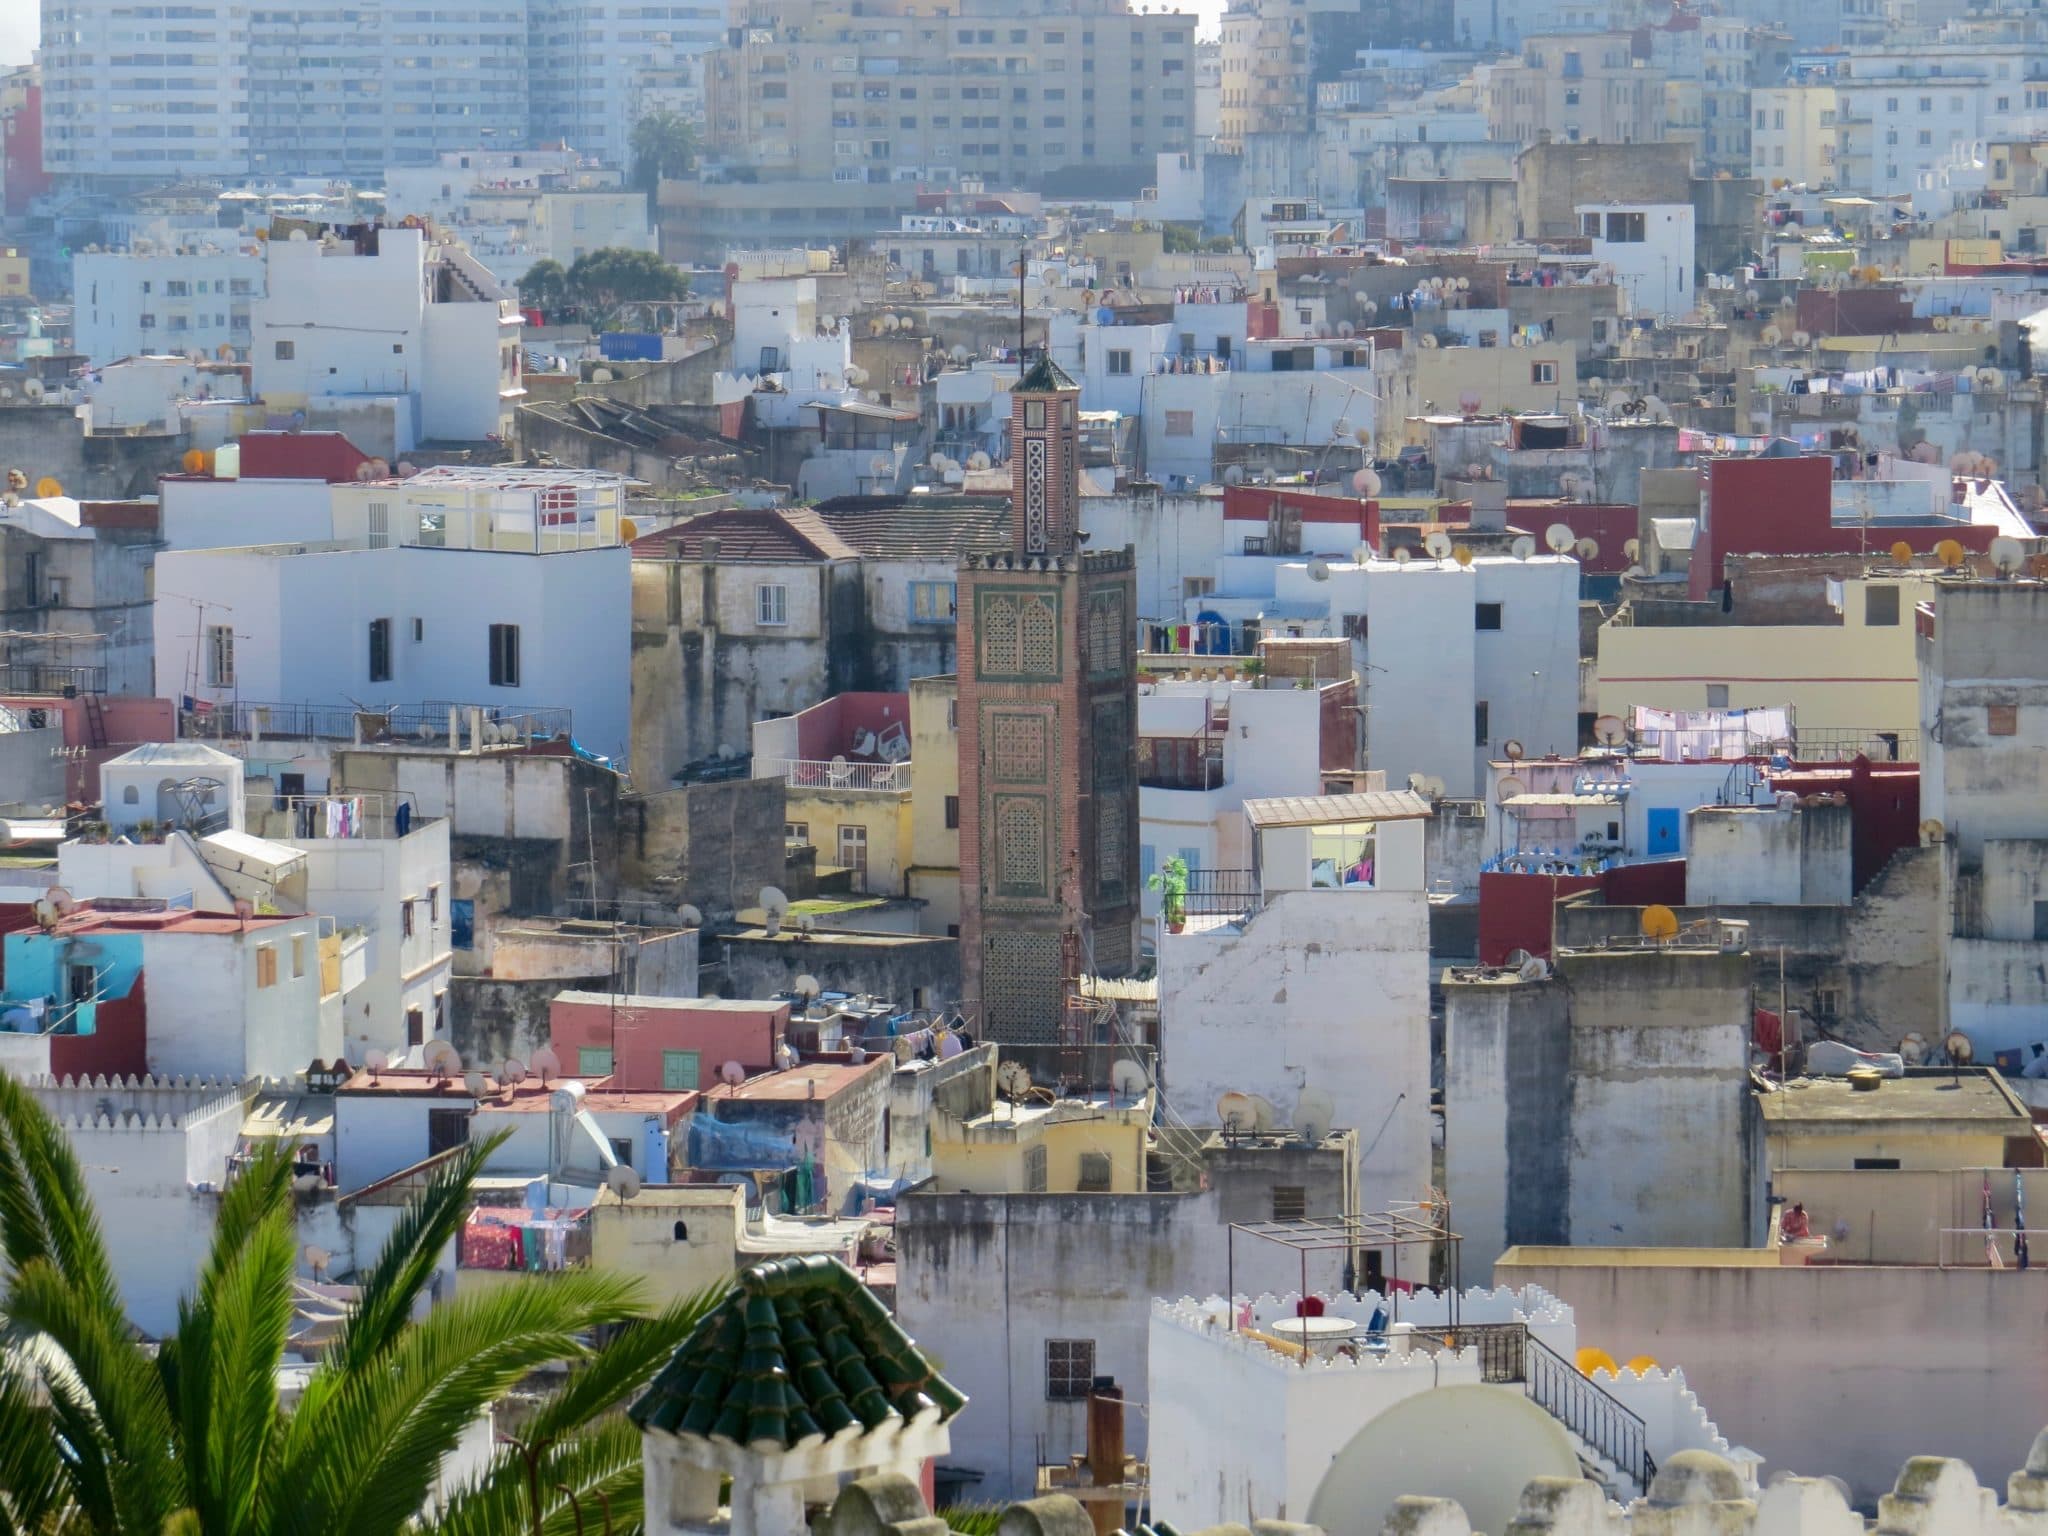 Must-see: 9 Things to Do in Tangier’s Old Town